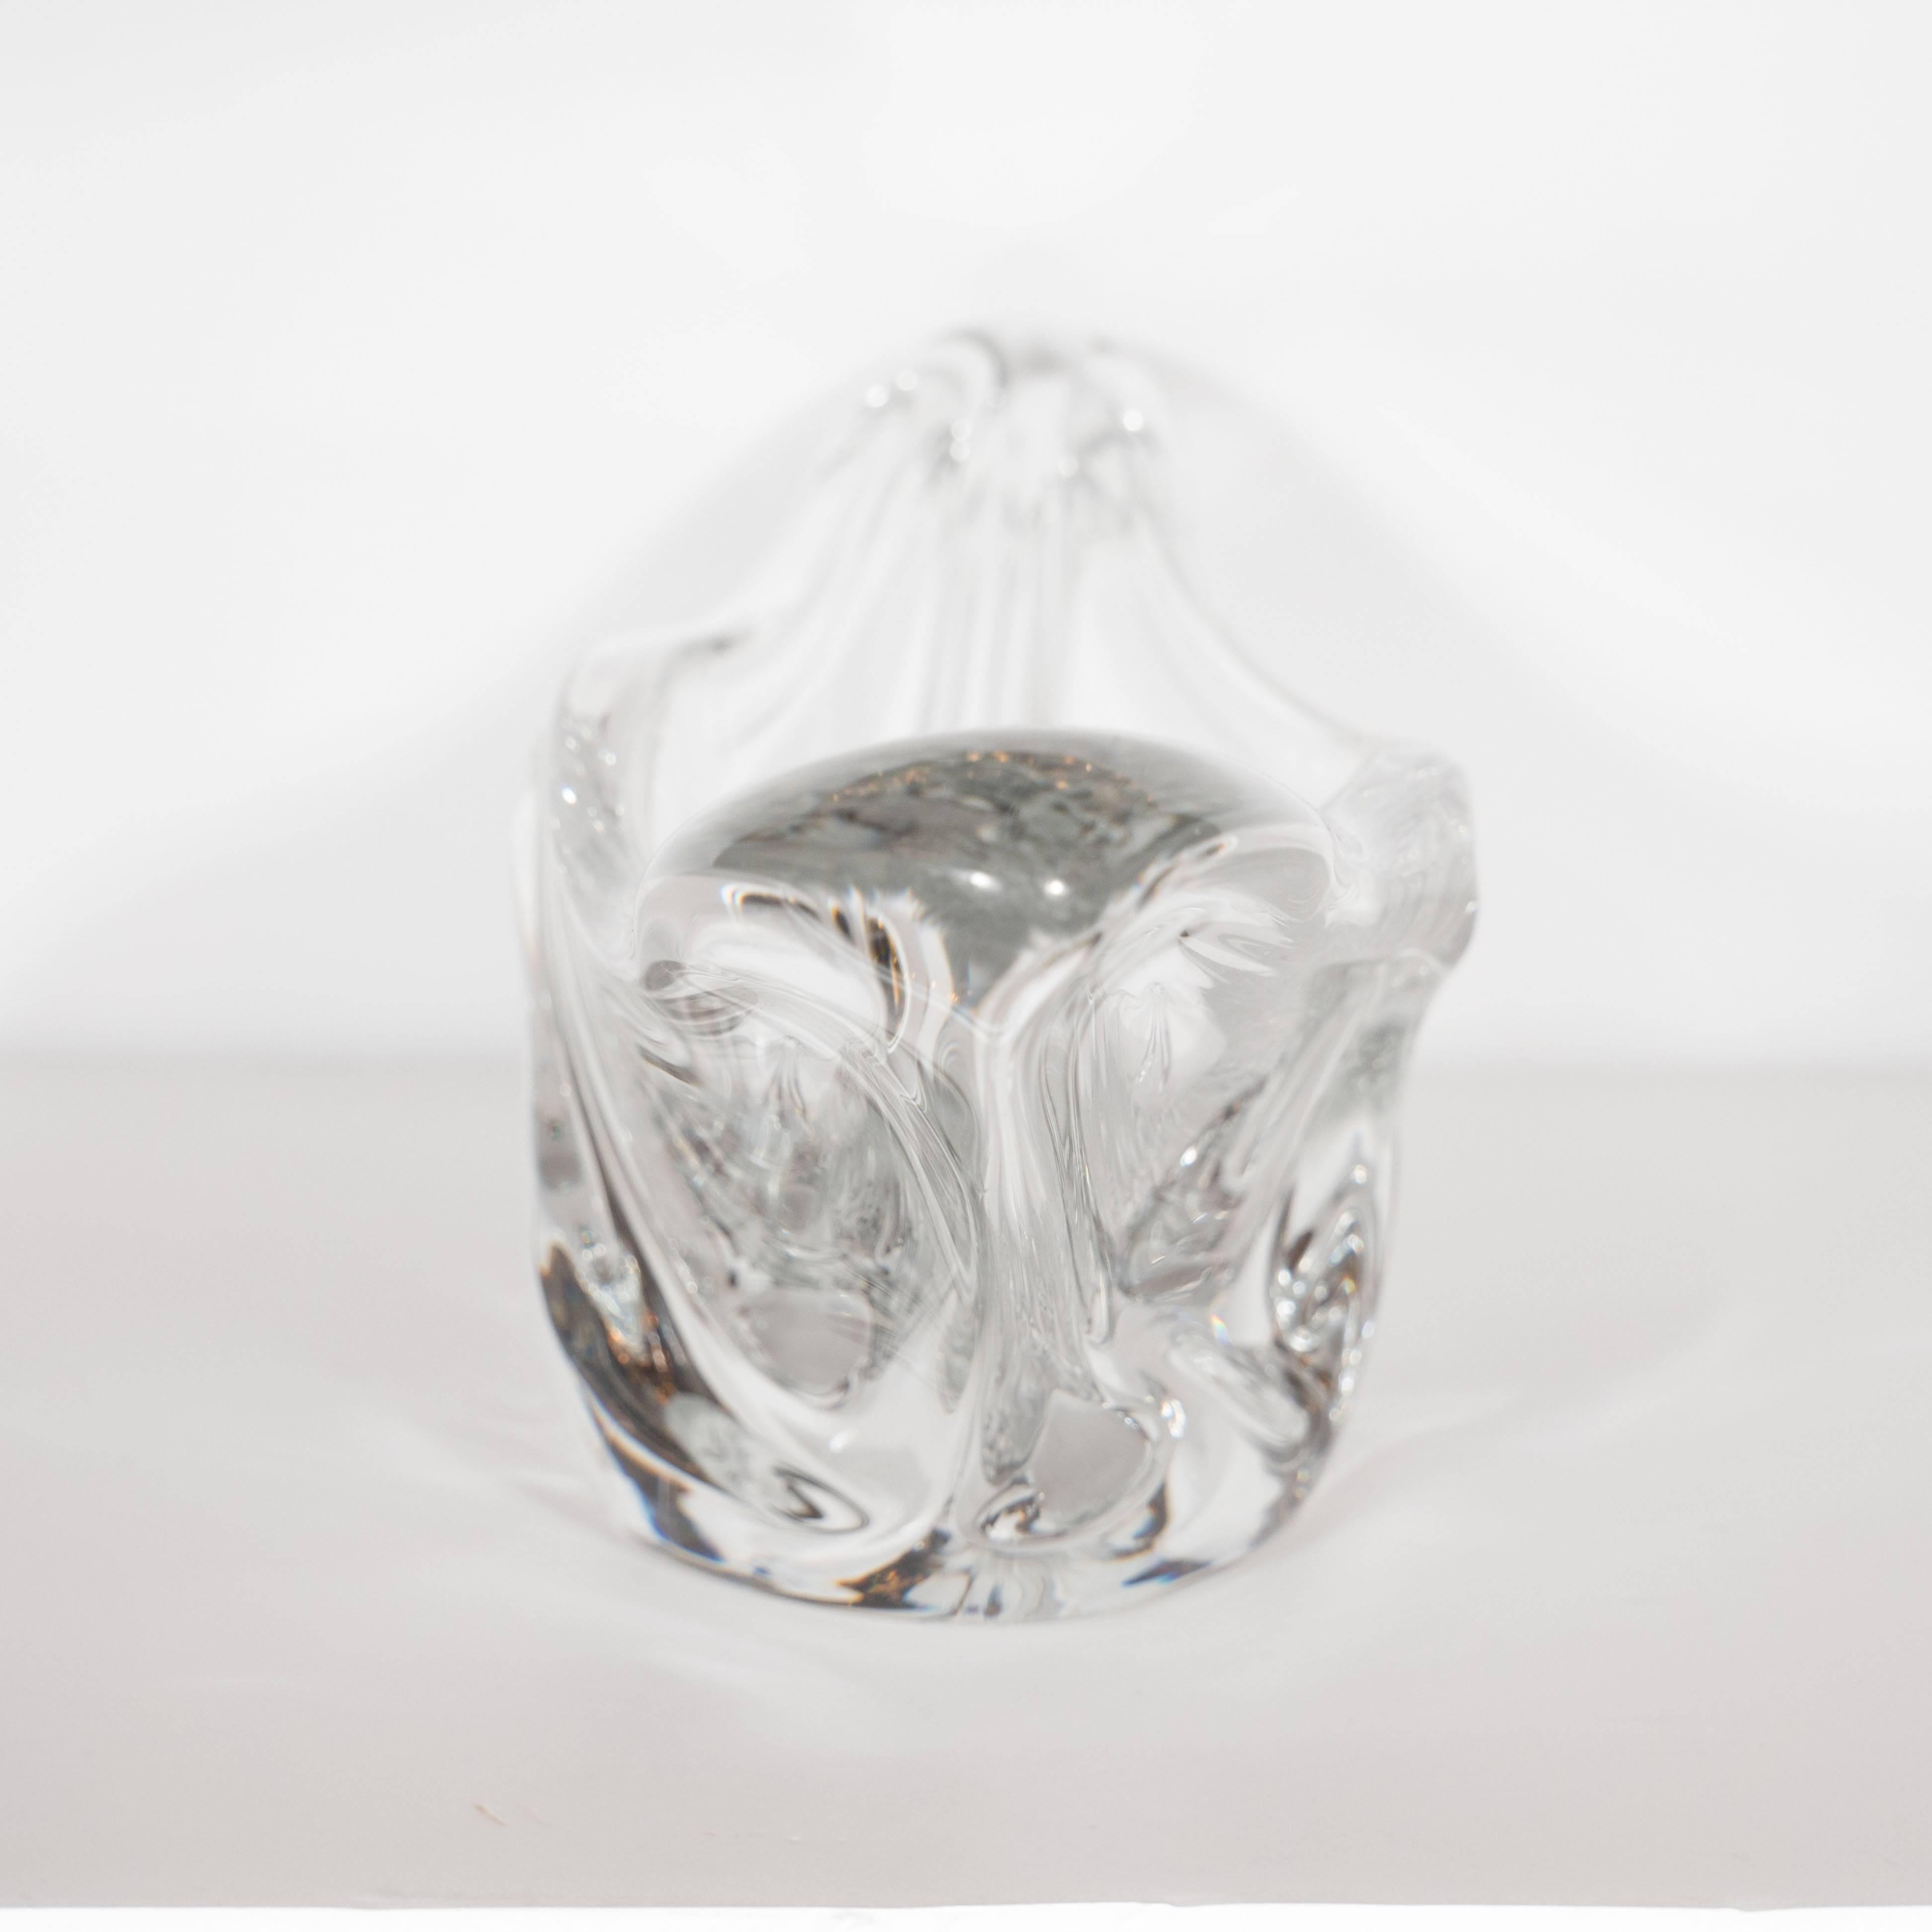 Sculptural and Curvilinear Midcentury Translucent Glass Bowl by Daum, France In Excellent Condition For Sale In New York, NY